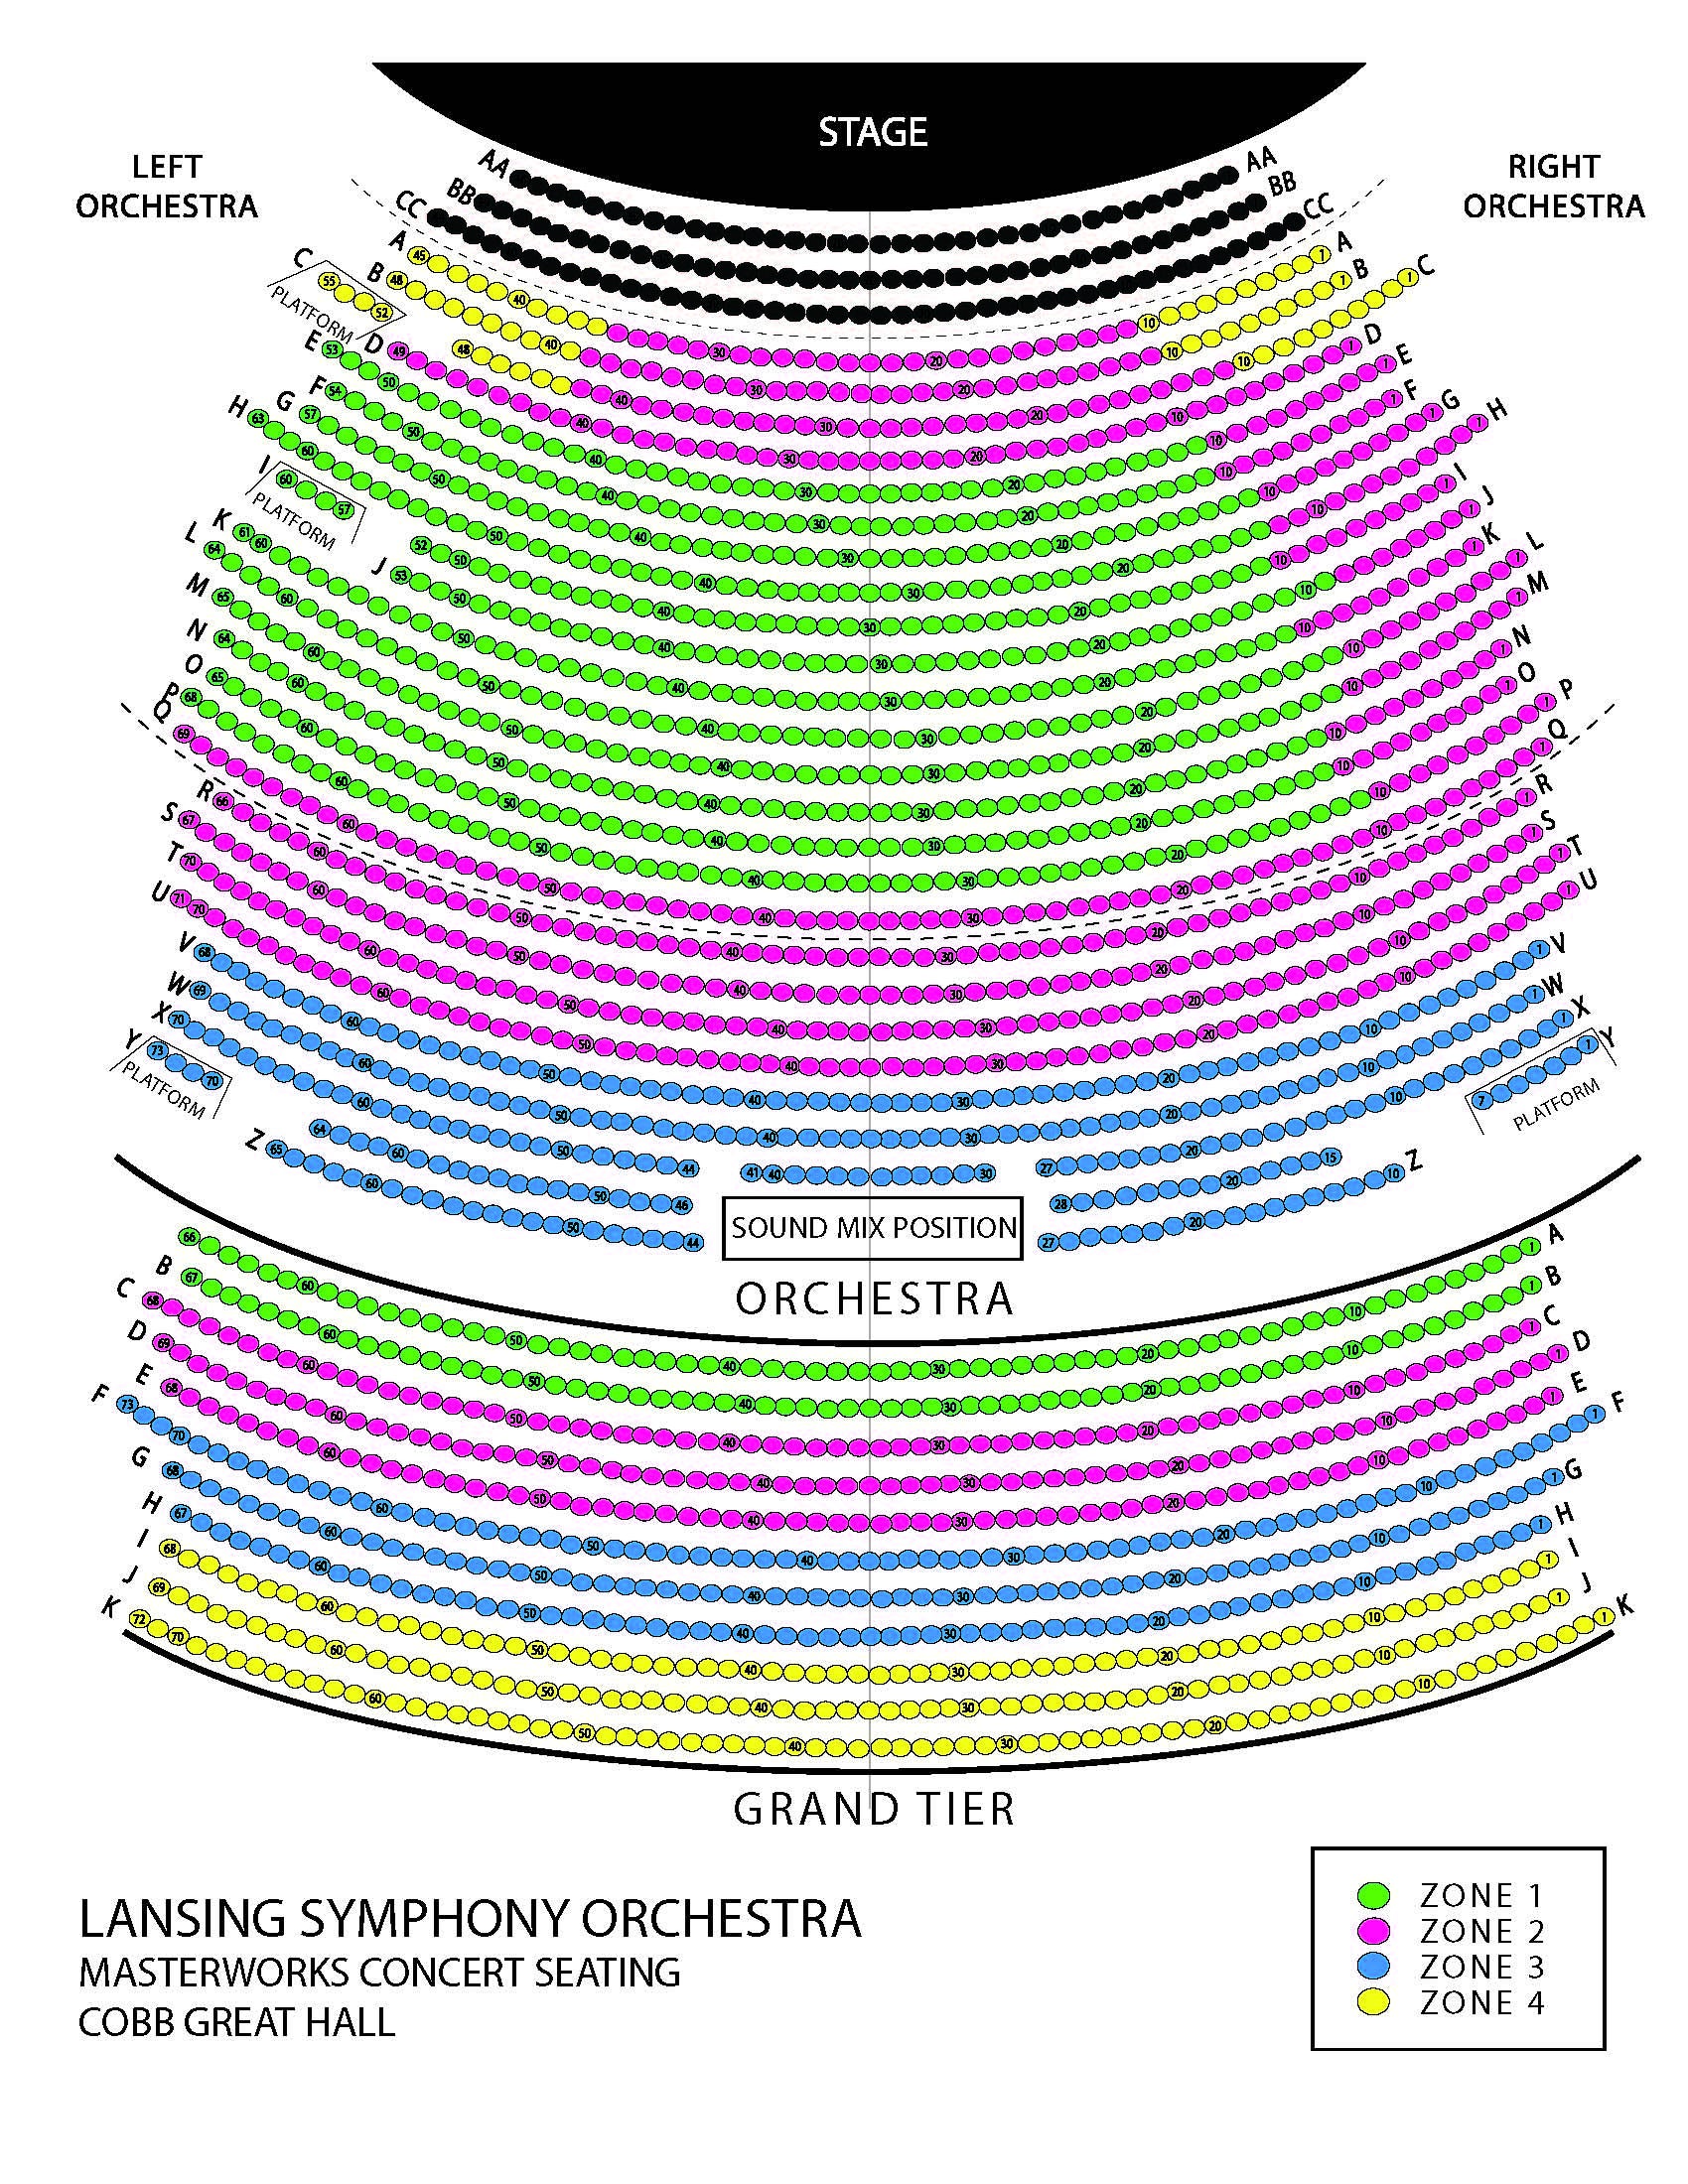 Overture Hall Seating Chart